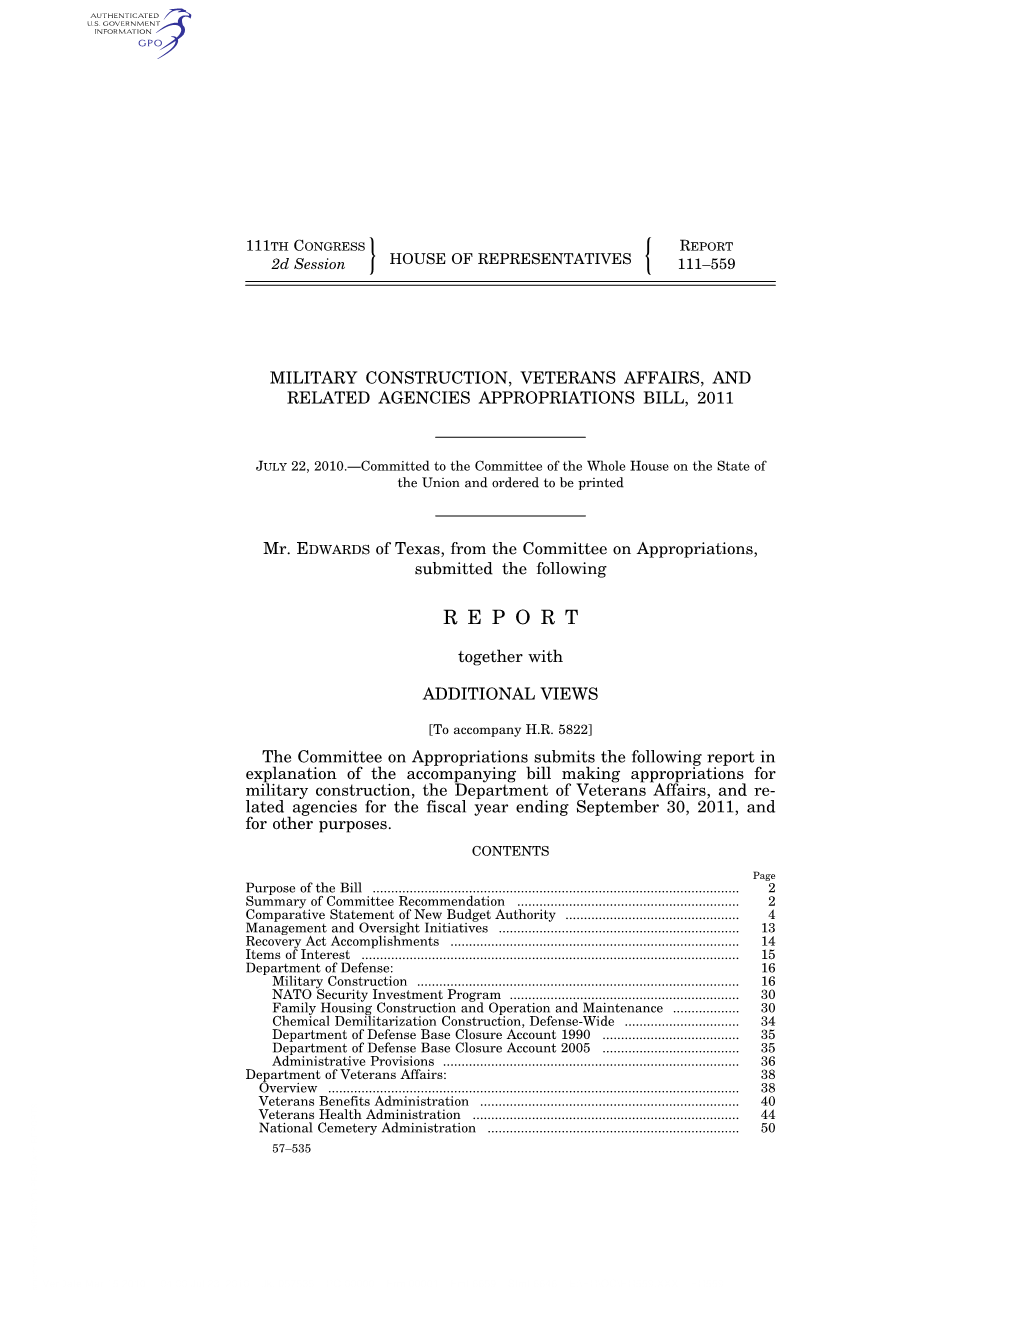 Military Construction, Veterans Affairs, and Related Agencies Appropriations Bill, 2011